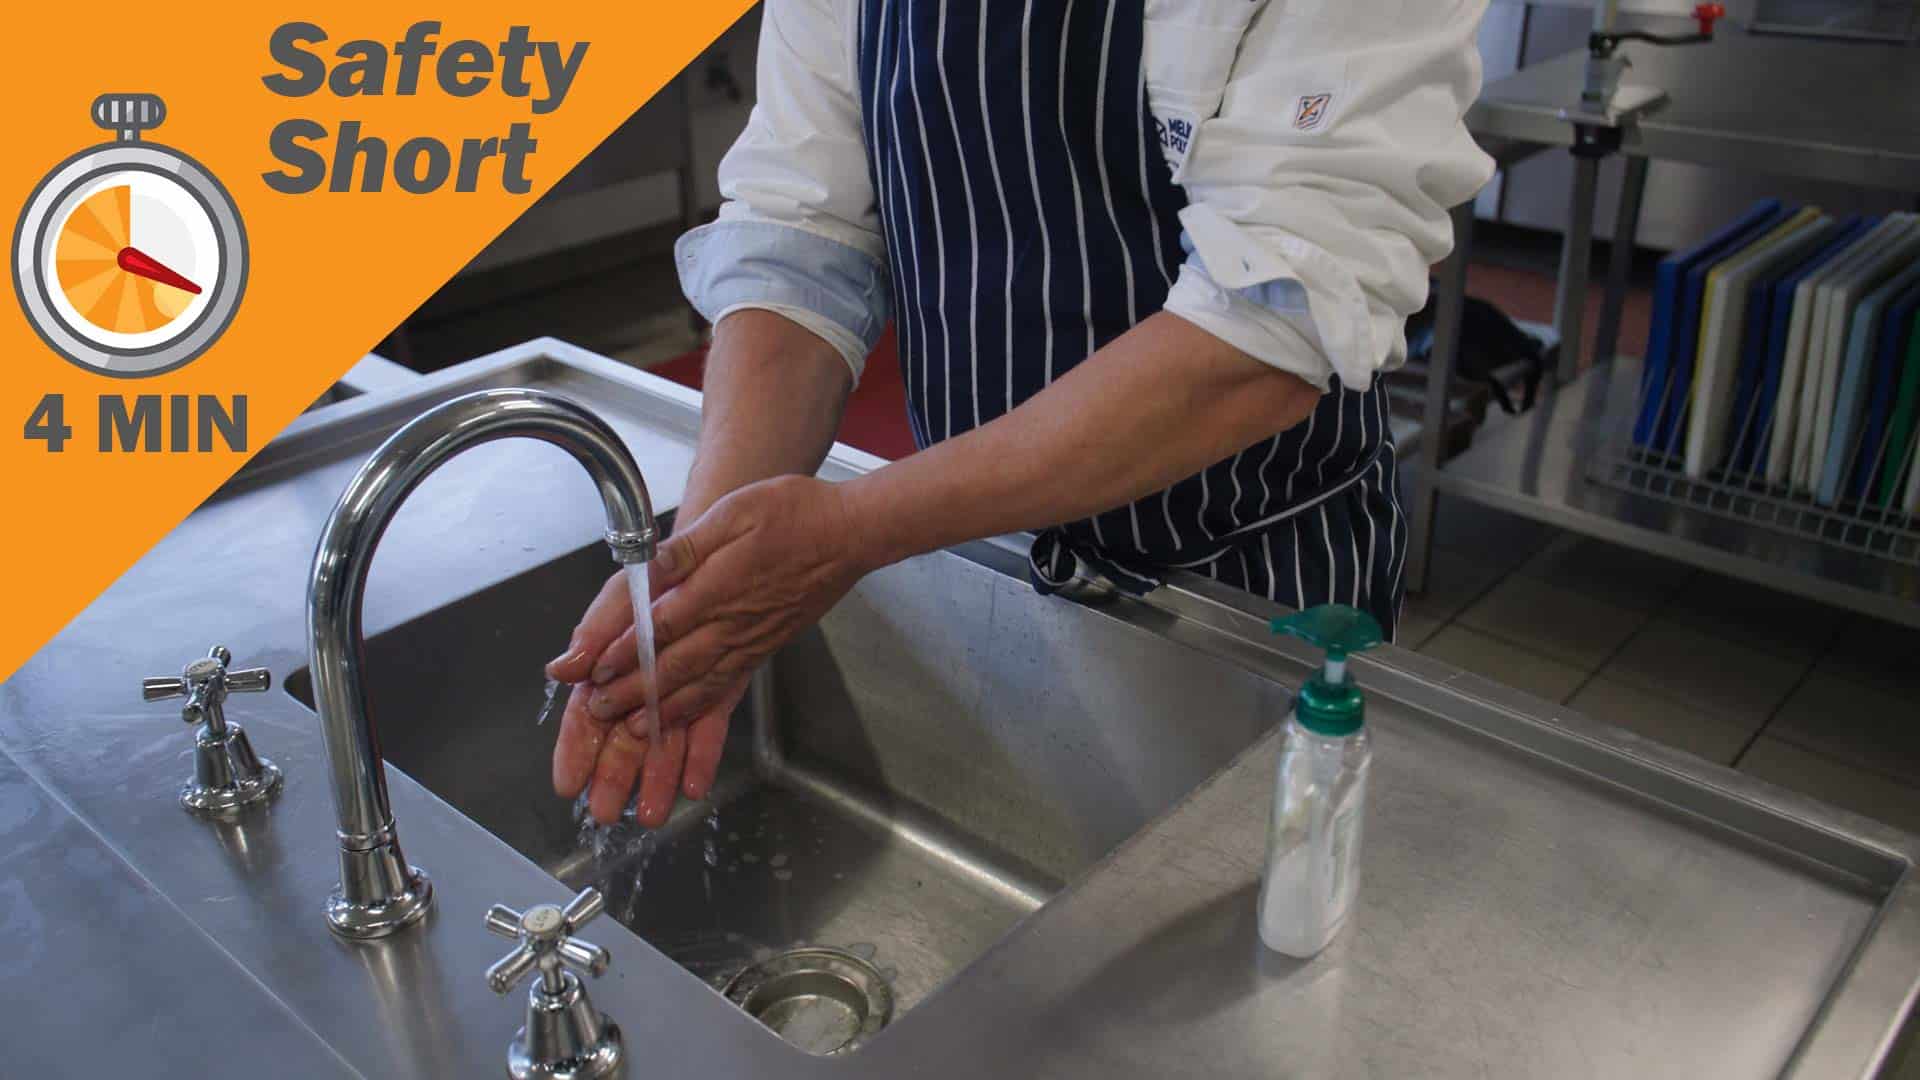 Kitchen Safety and Food Hygiene – Hygiene Solutions Cleanliness [Safety Short]